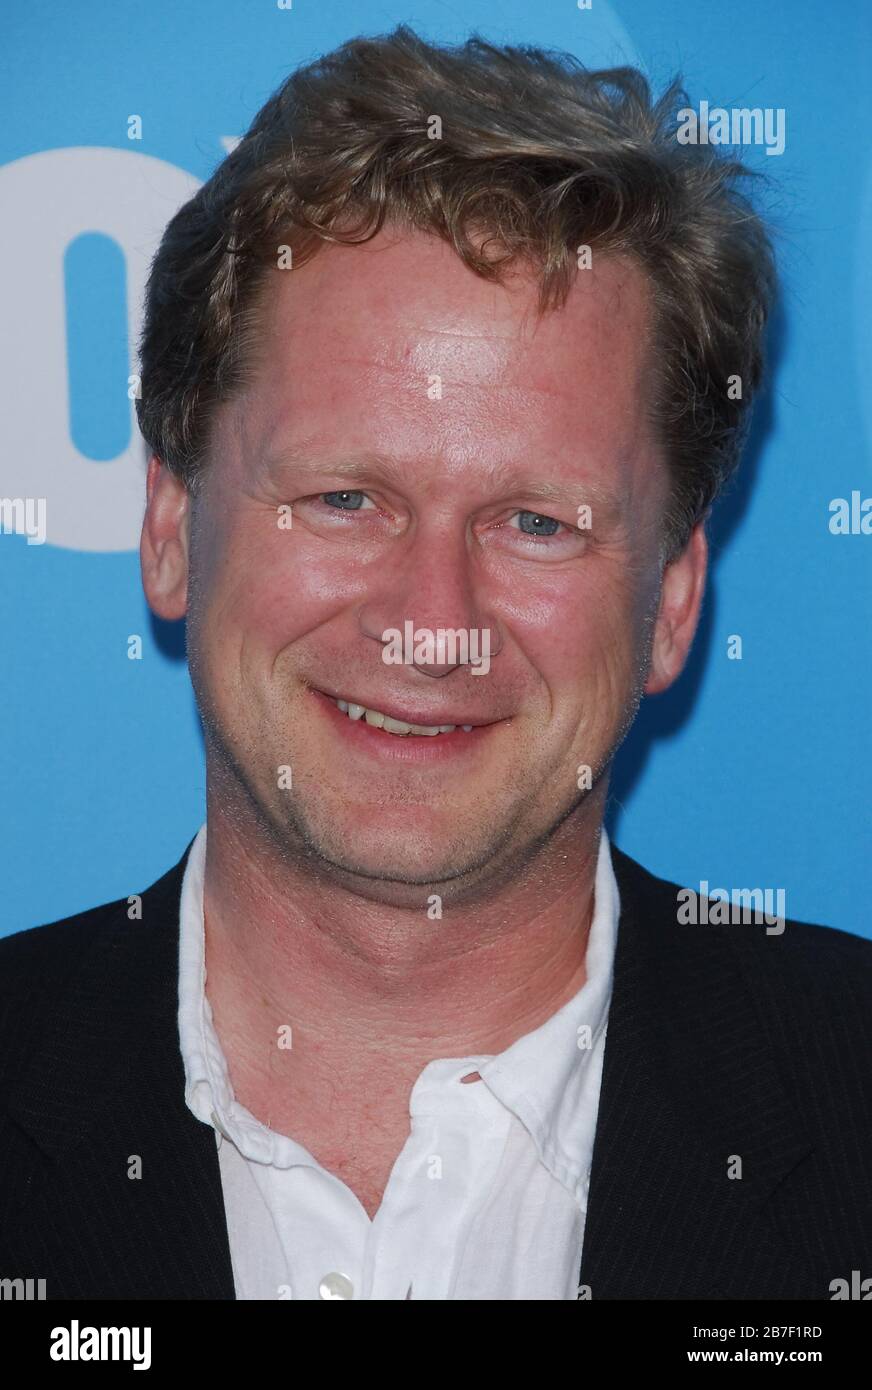 Paul Redford at the FOX 2006 Summer TCA All Star Party held at the Ritz Carlton Huntington Hotel, Horseshoe Garden in Pasadena, CA. The event took place on Tuesday, July 25, 2006.  Photo by: SBM / PictureLux Stock Photo